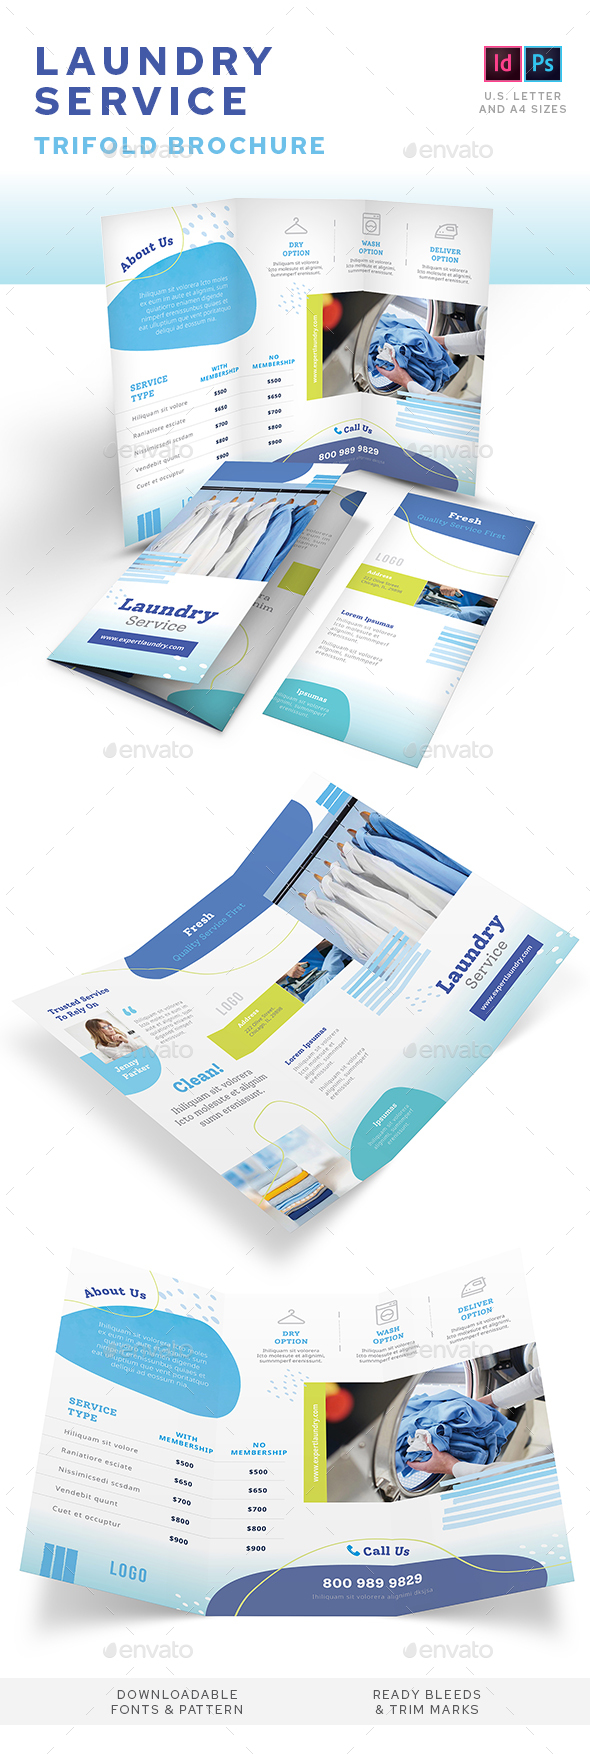 Laundry Service Trifold Brochure